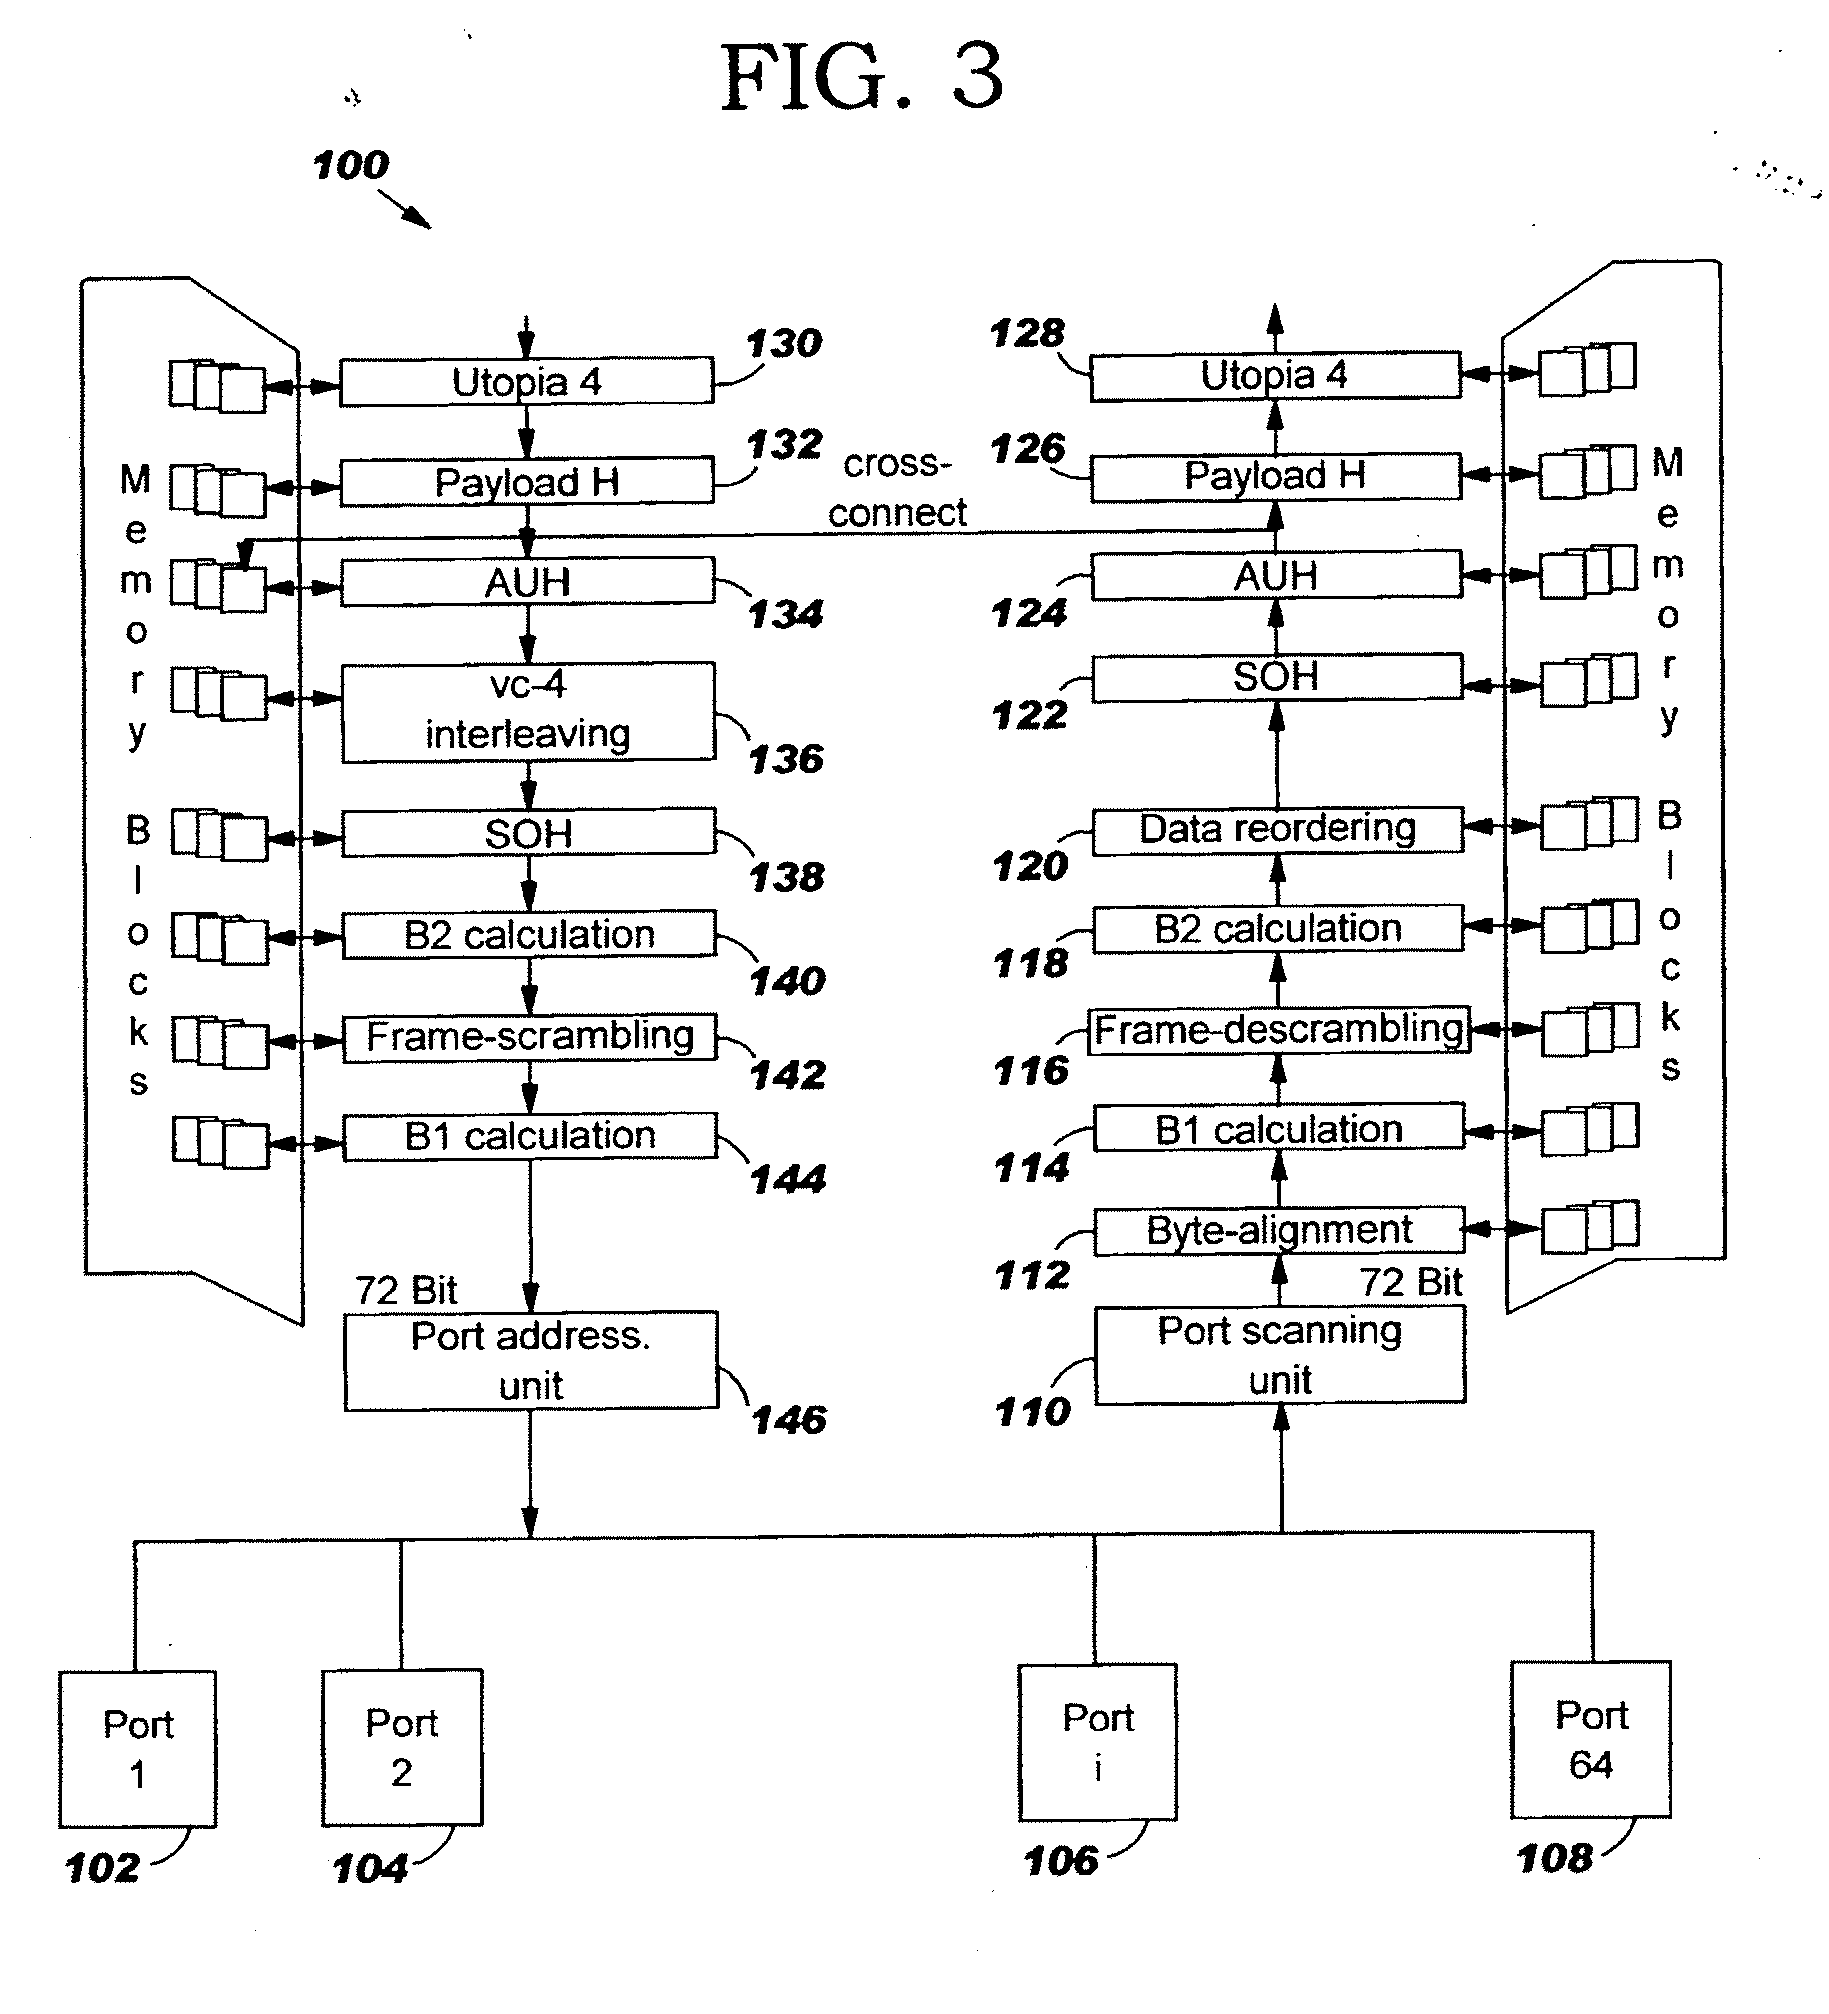 Stm-1 to stm-64 sdh/sonet framer with data multiplexing from a series of configurable I/O ports